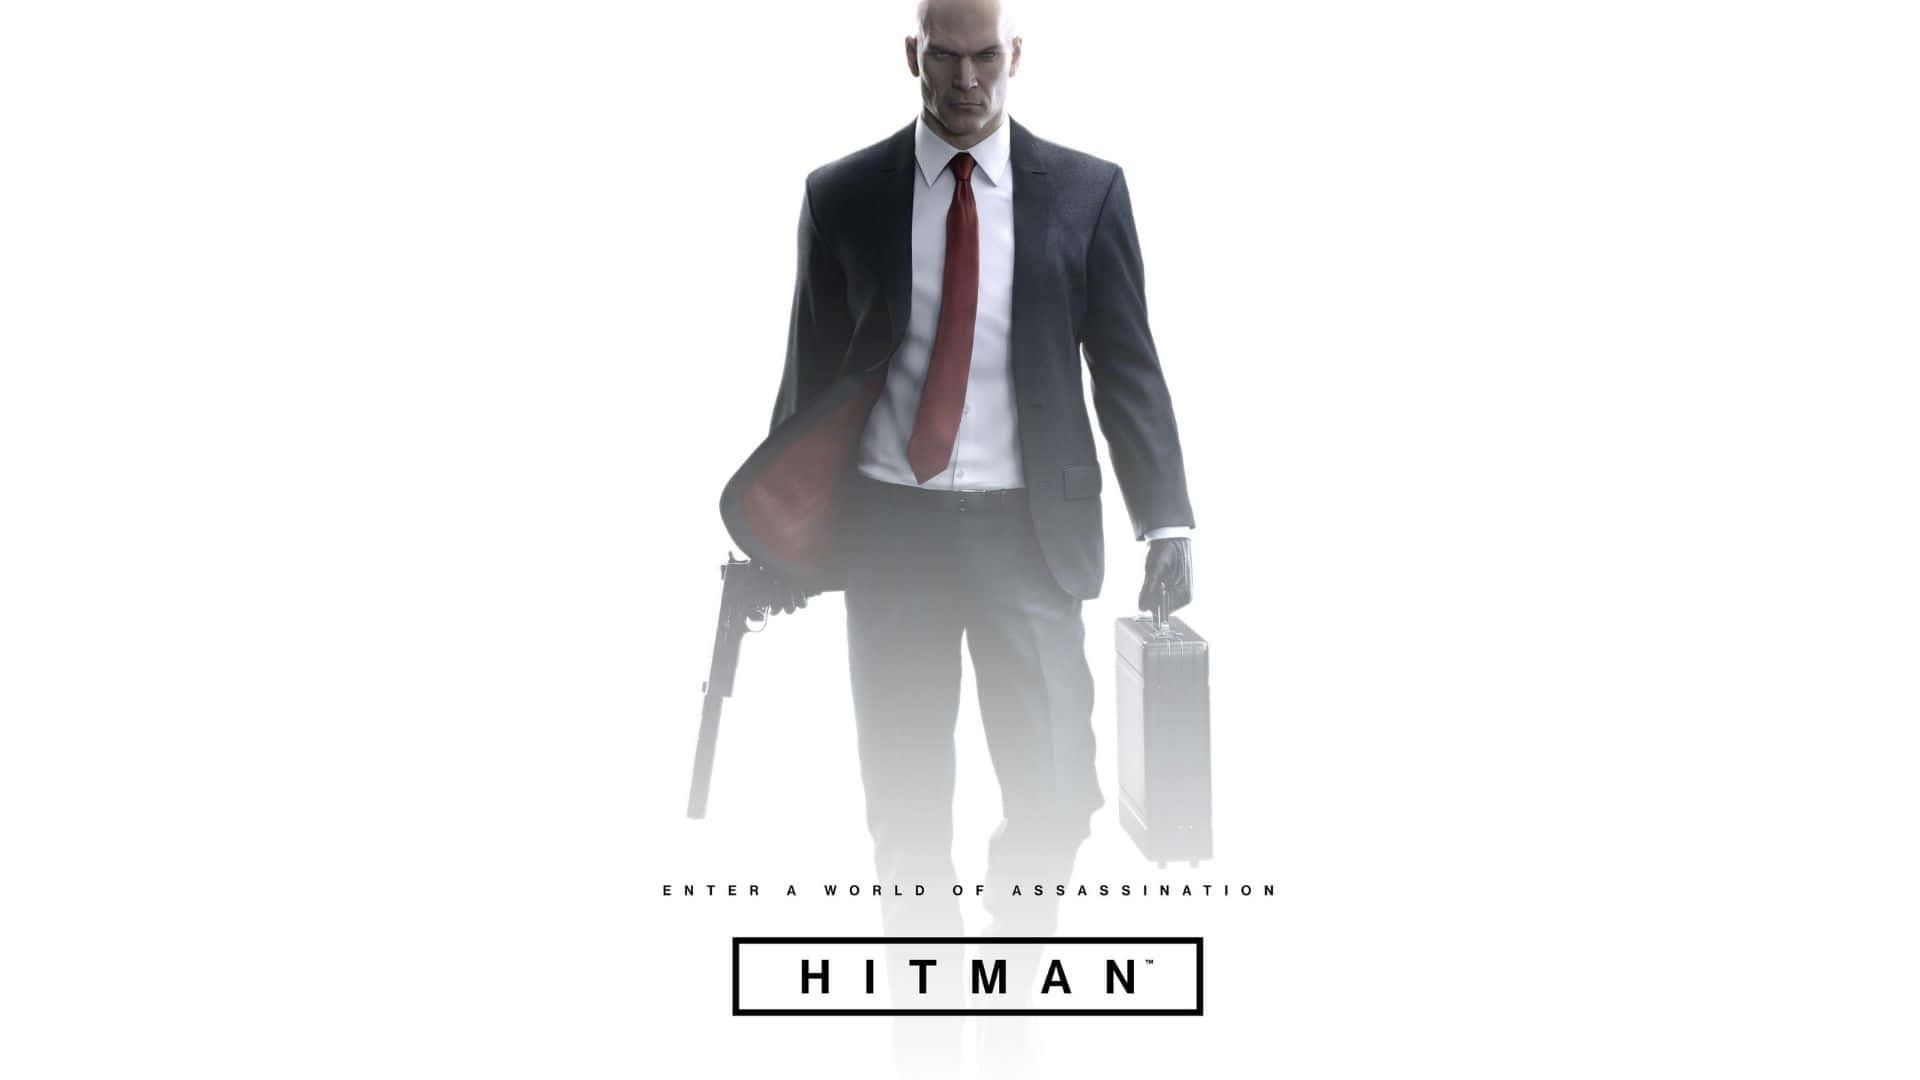 The assassin Agent 47 from the game Hitman Absolution.